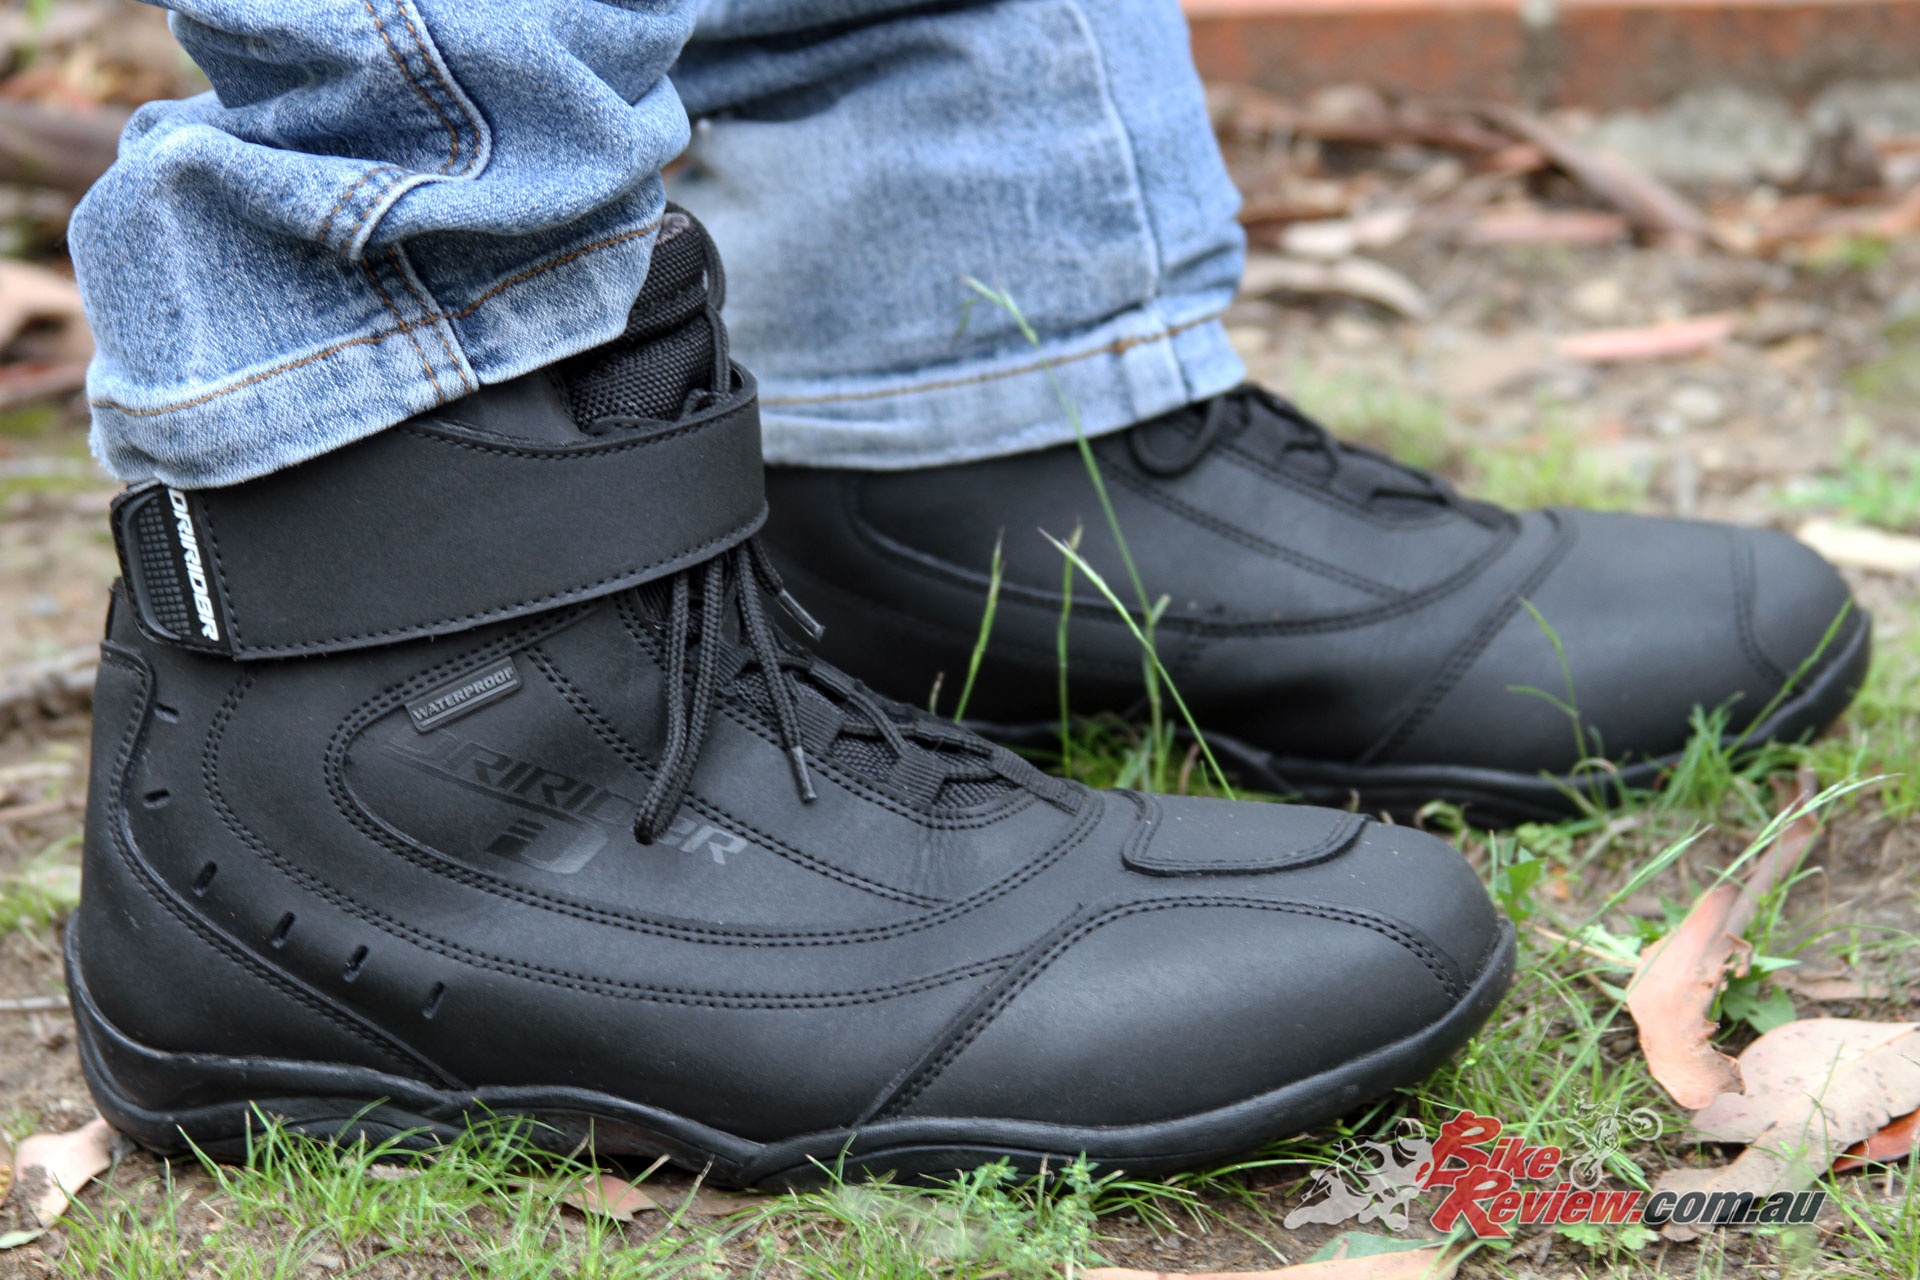 Dririder Street 2.0 Boot - With laces and velcro strap